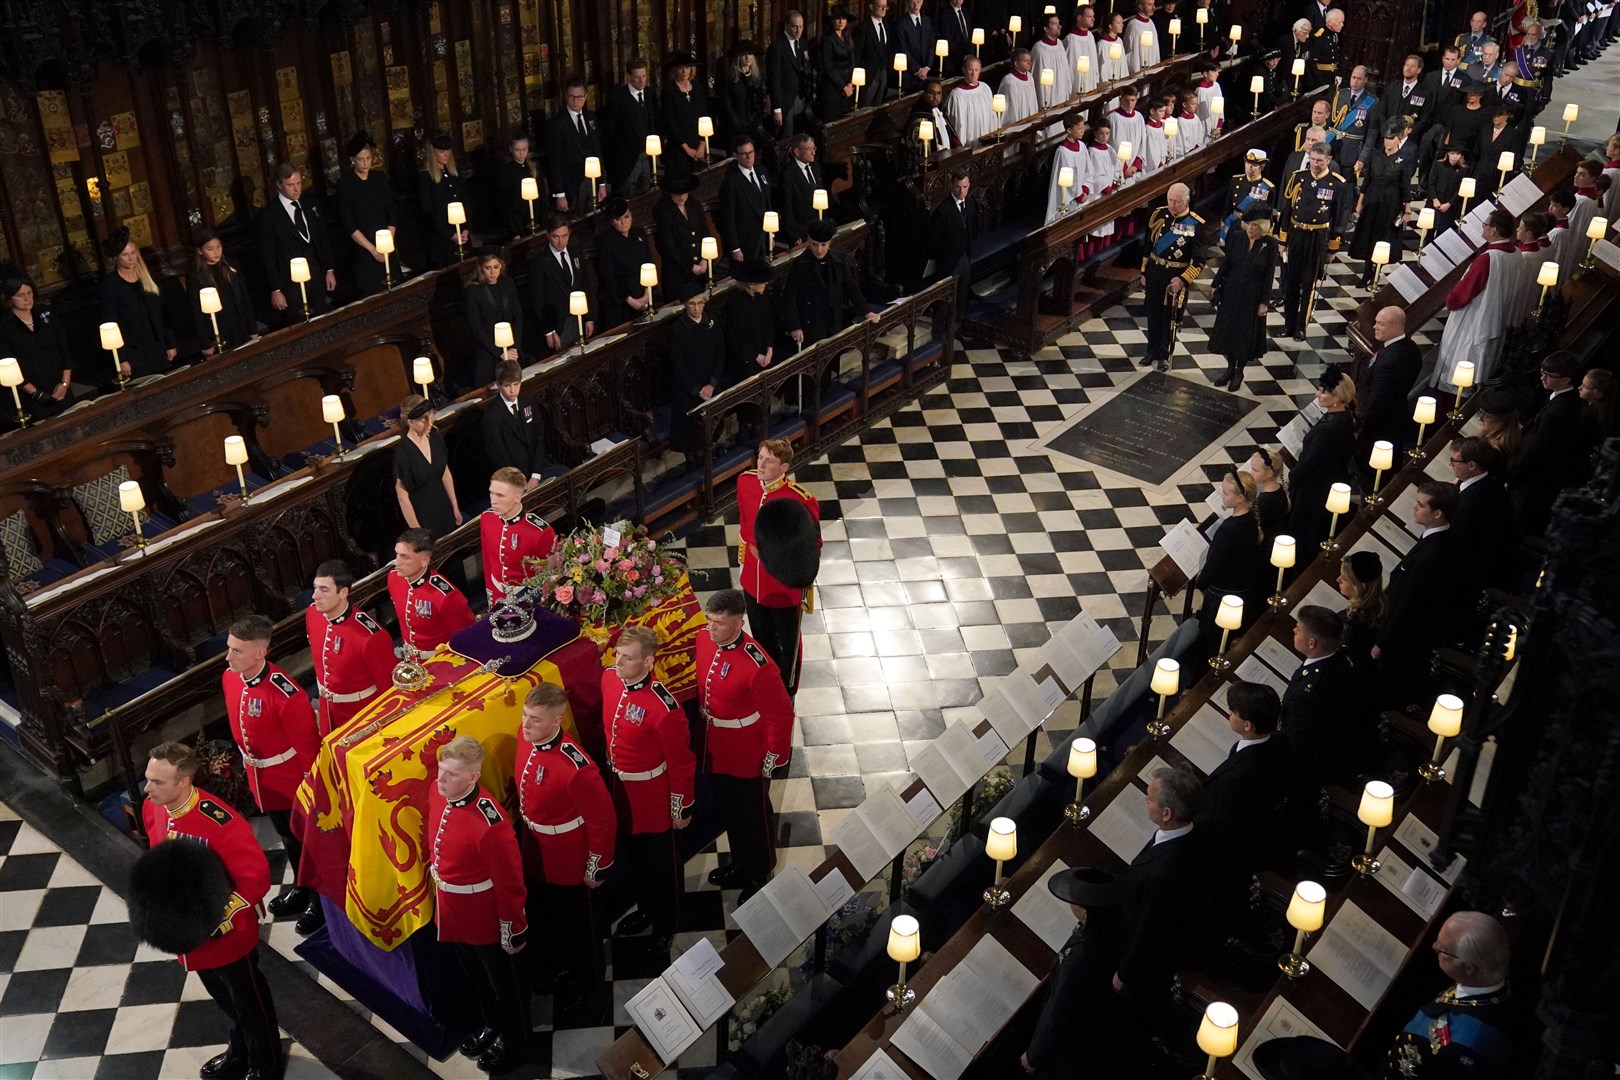 Senior royals, including the new King Charles III, follow the Queen’s coffin as it is carried by the Bearer Party into the Committal Service at St George’s Chapel in Windsor Castle, Berkshire, on Monday September 19 (Victoria Jones/PA)